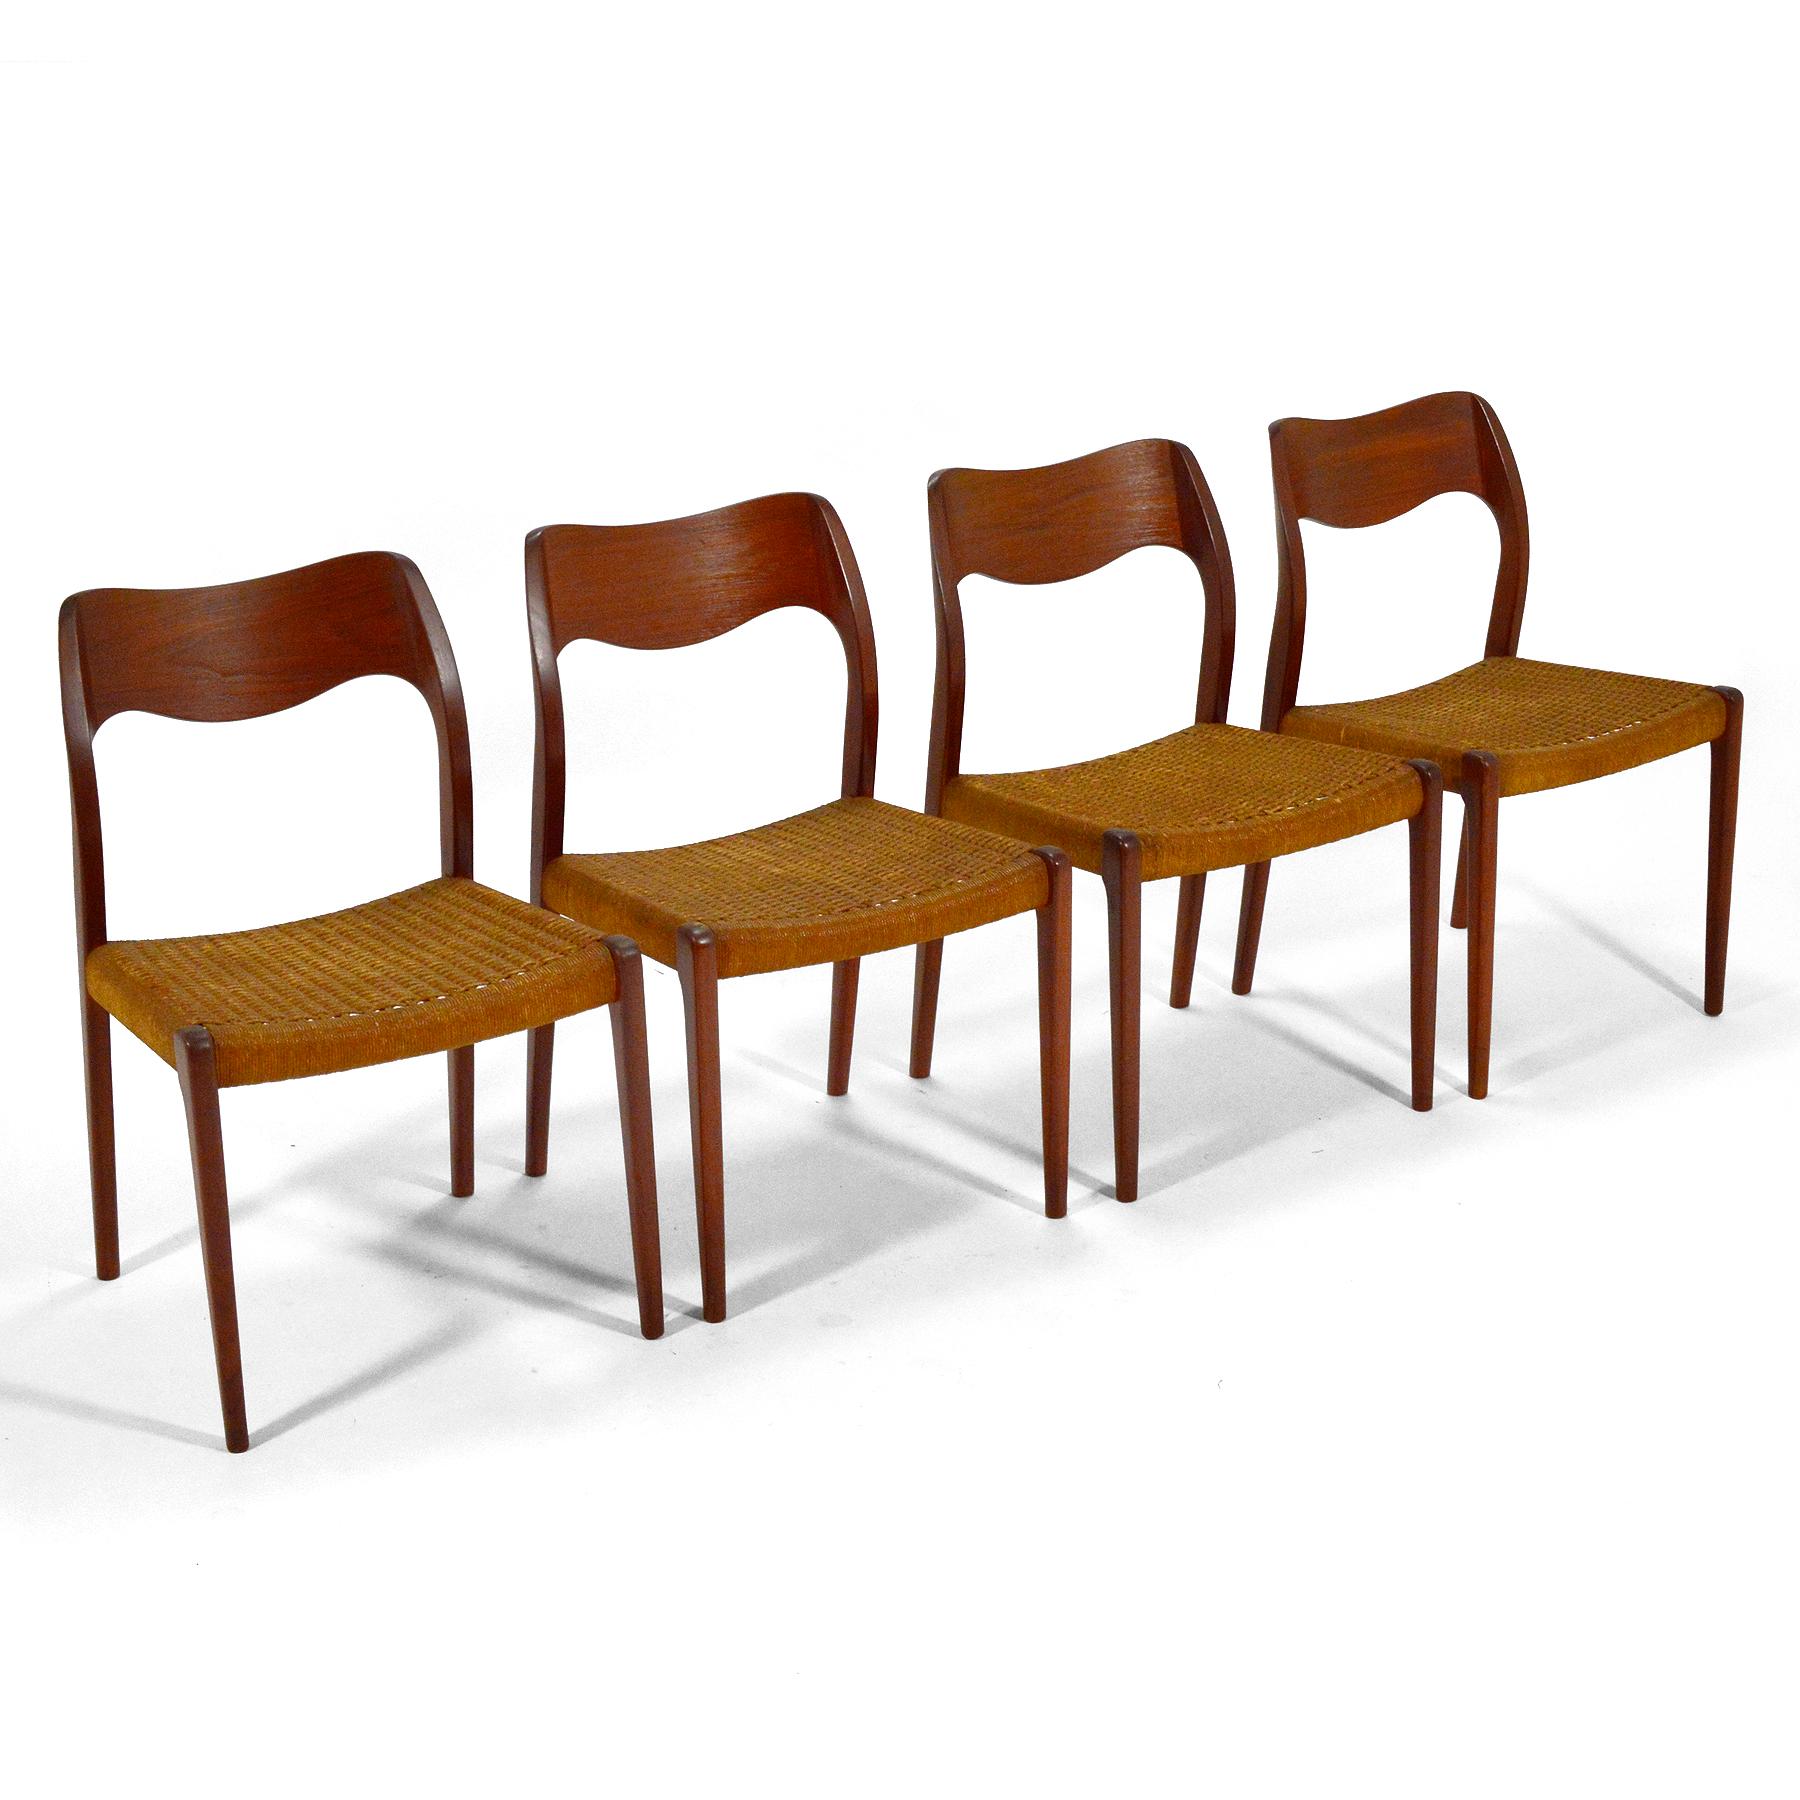 A handsome set of four model 71 dining chairs designed by Niels O. Møller and made by J.L. Møllers Møbelfabrik. The sculptural teak frames and woven paper cord seats have a beautiful patina from years of age and use.